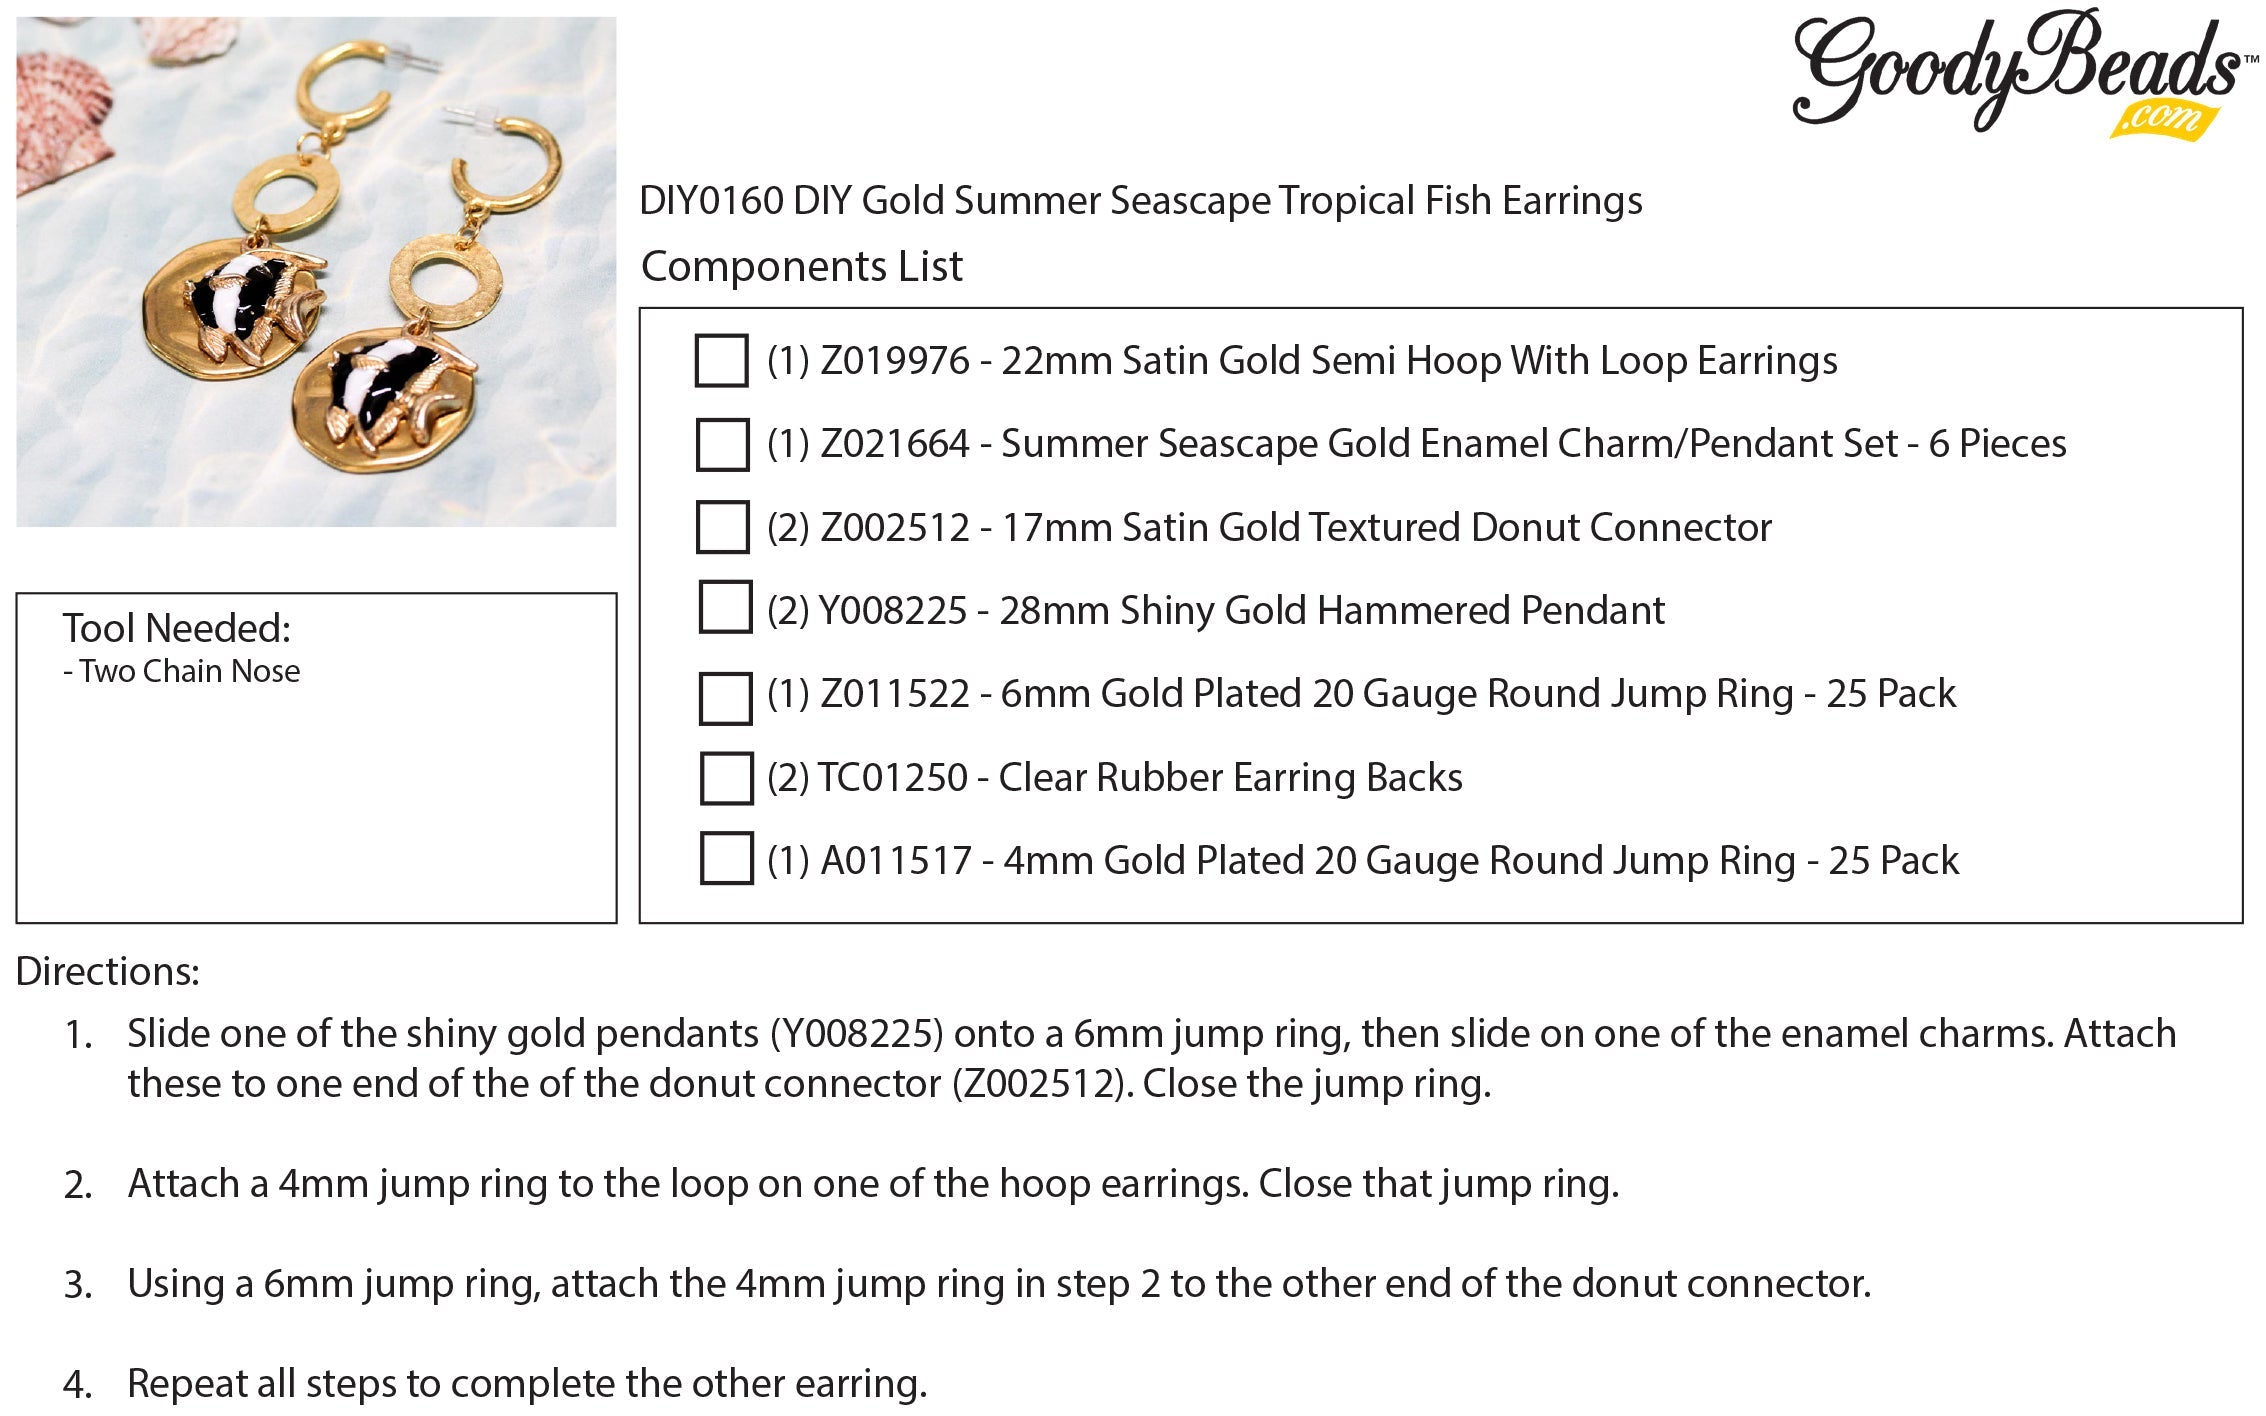 INSTRUCTIONS for DIY Gold Summer Seascape Tropical Fish Earrings - Goody Beads